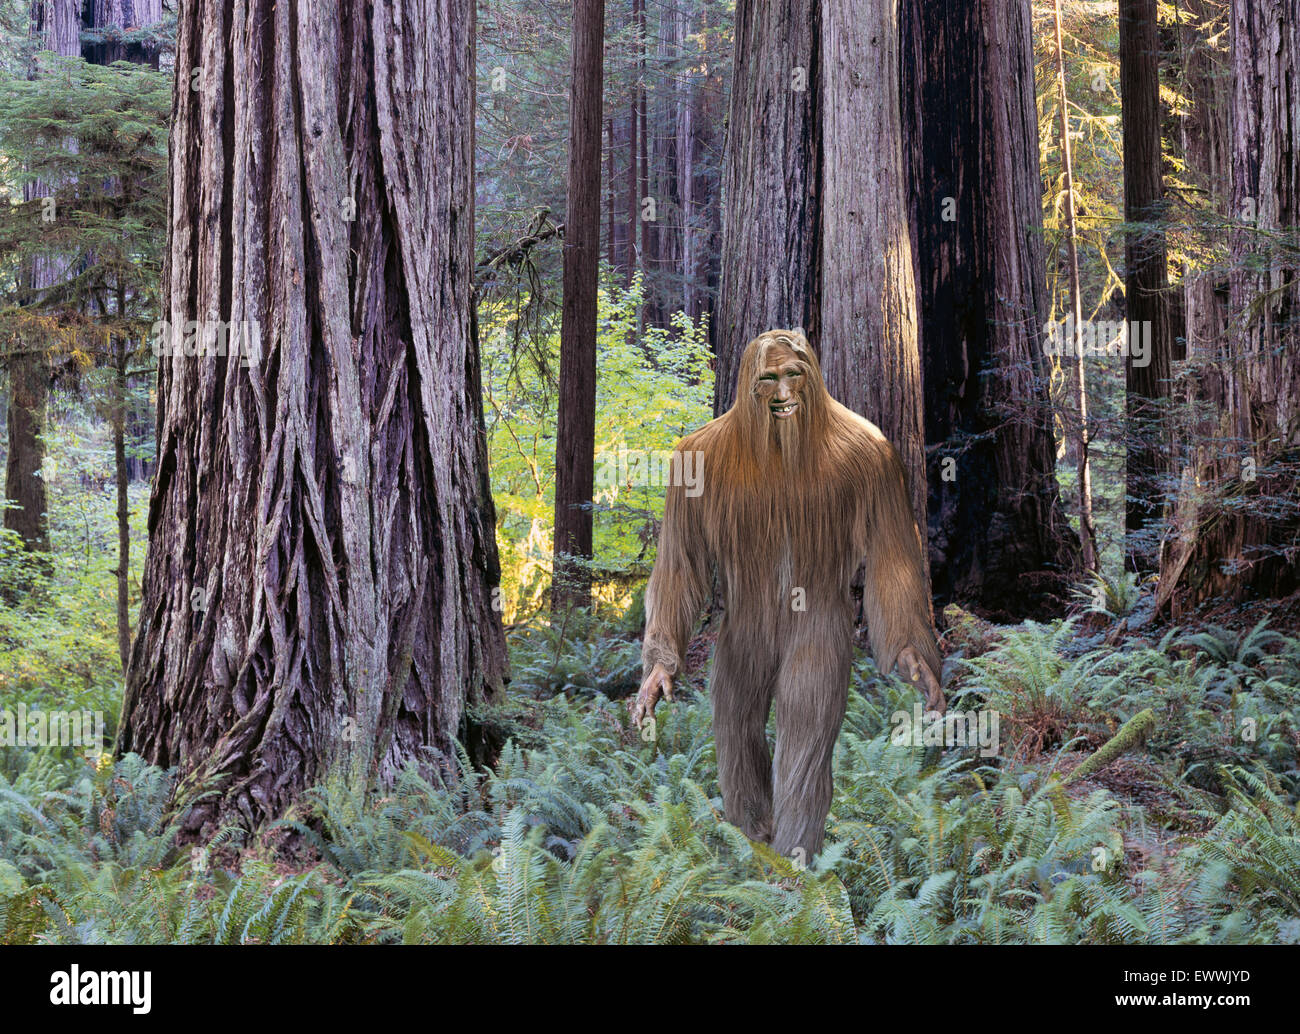 A photograph of bigfoot, also known as Sasquatch, in a dense forest in the Pacific Northwest. Stock Photo